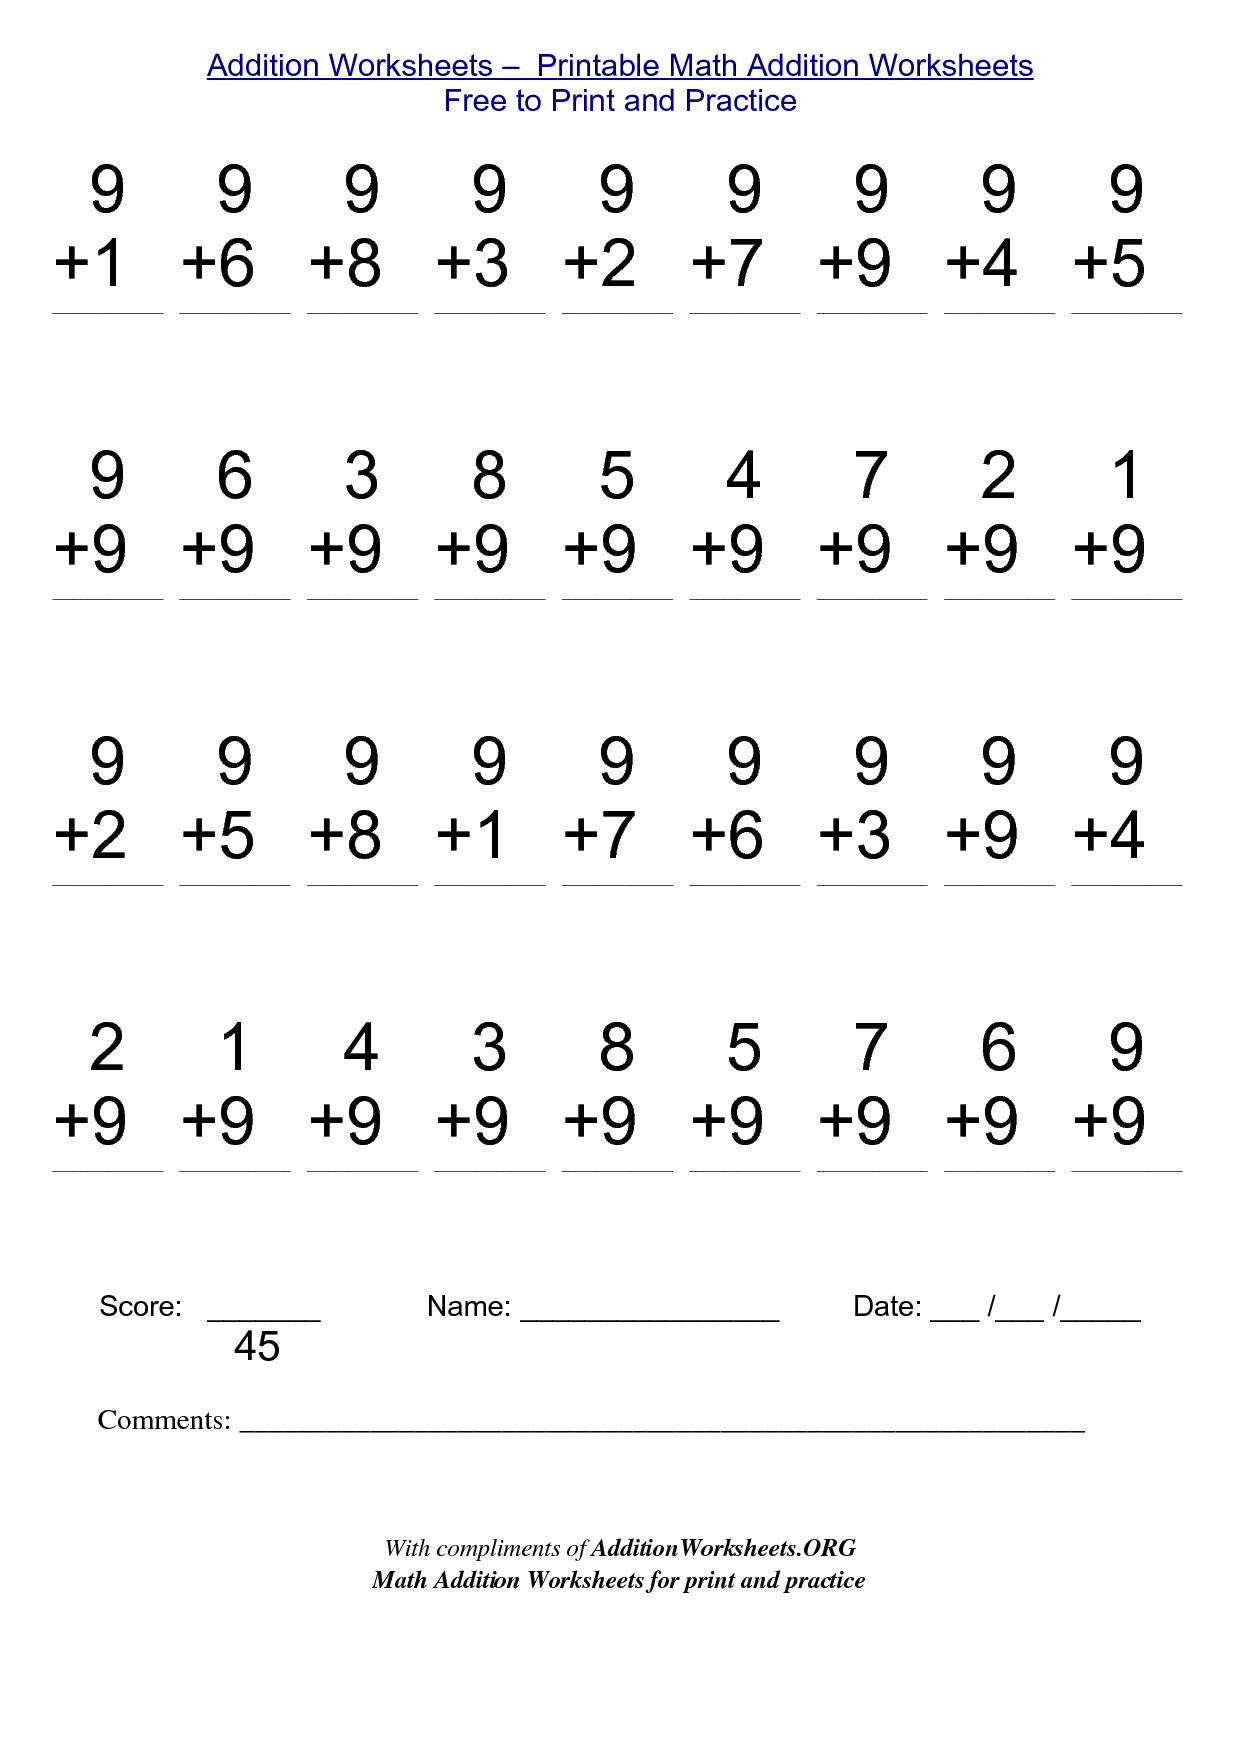 Math Worksheets For Free To Print Math Addition Worksheets First Grade Math Worksheets 2nd Grade Worksheets